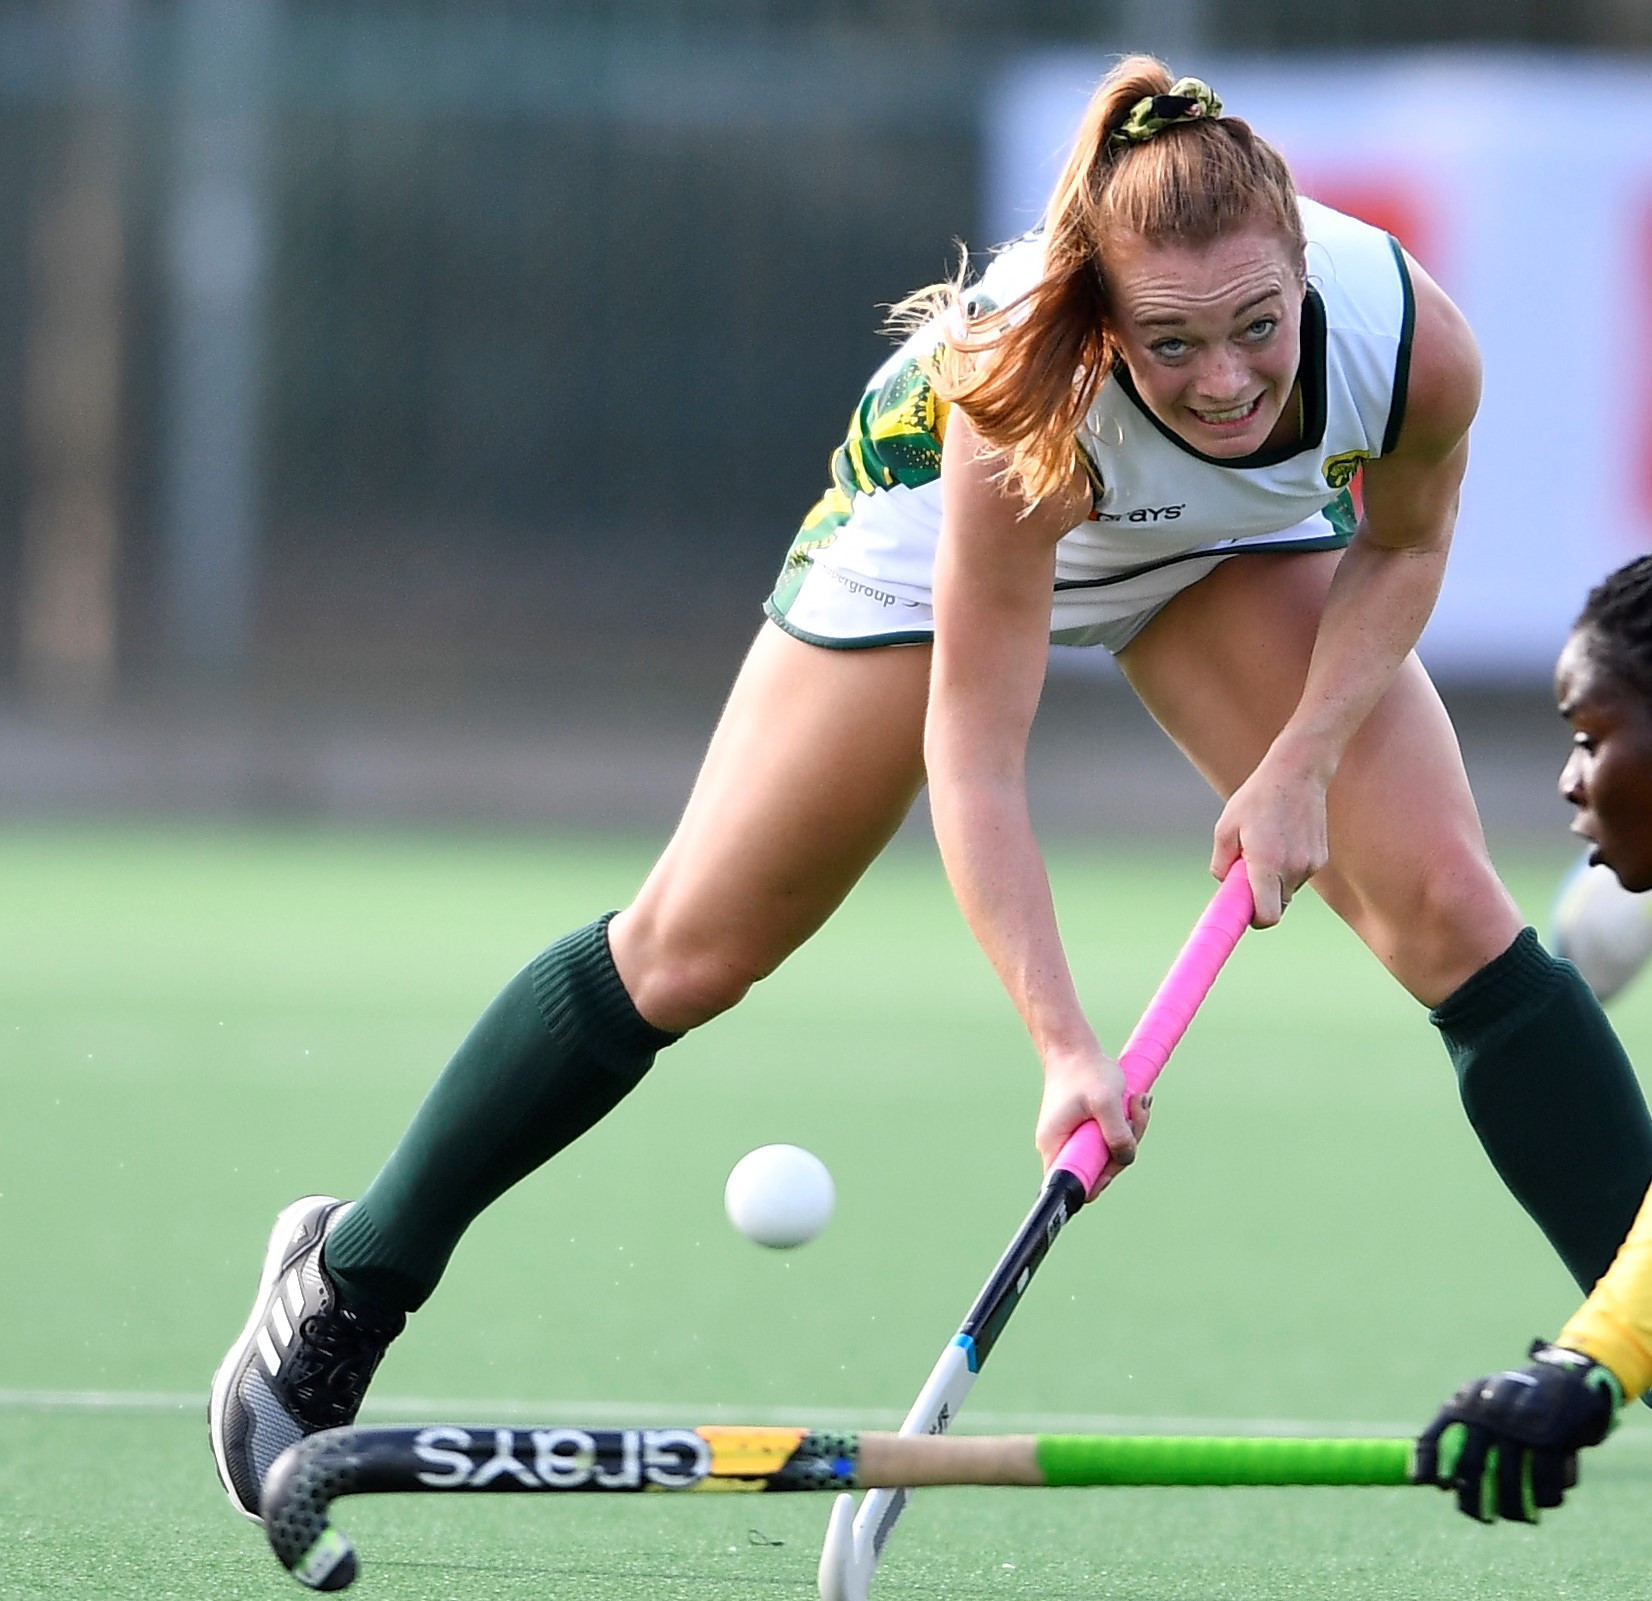 Lillian du Plessis was among the scorers in South Africa's 3-0 win over Zimbabwe ©Getty Images